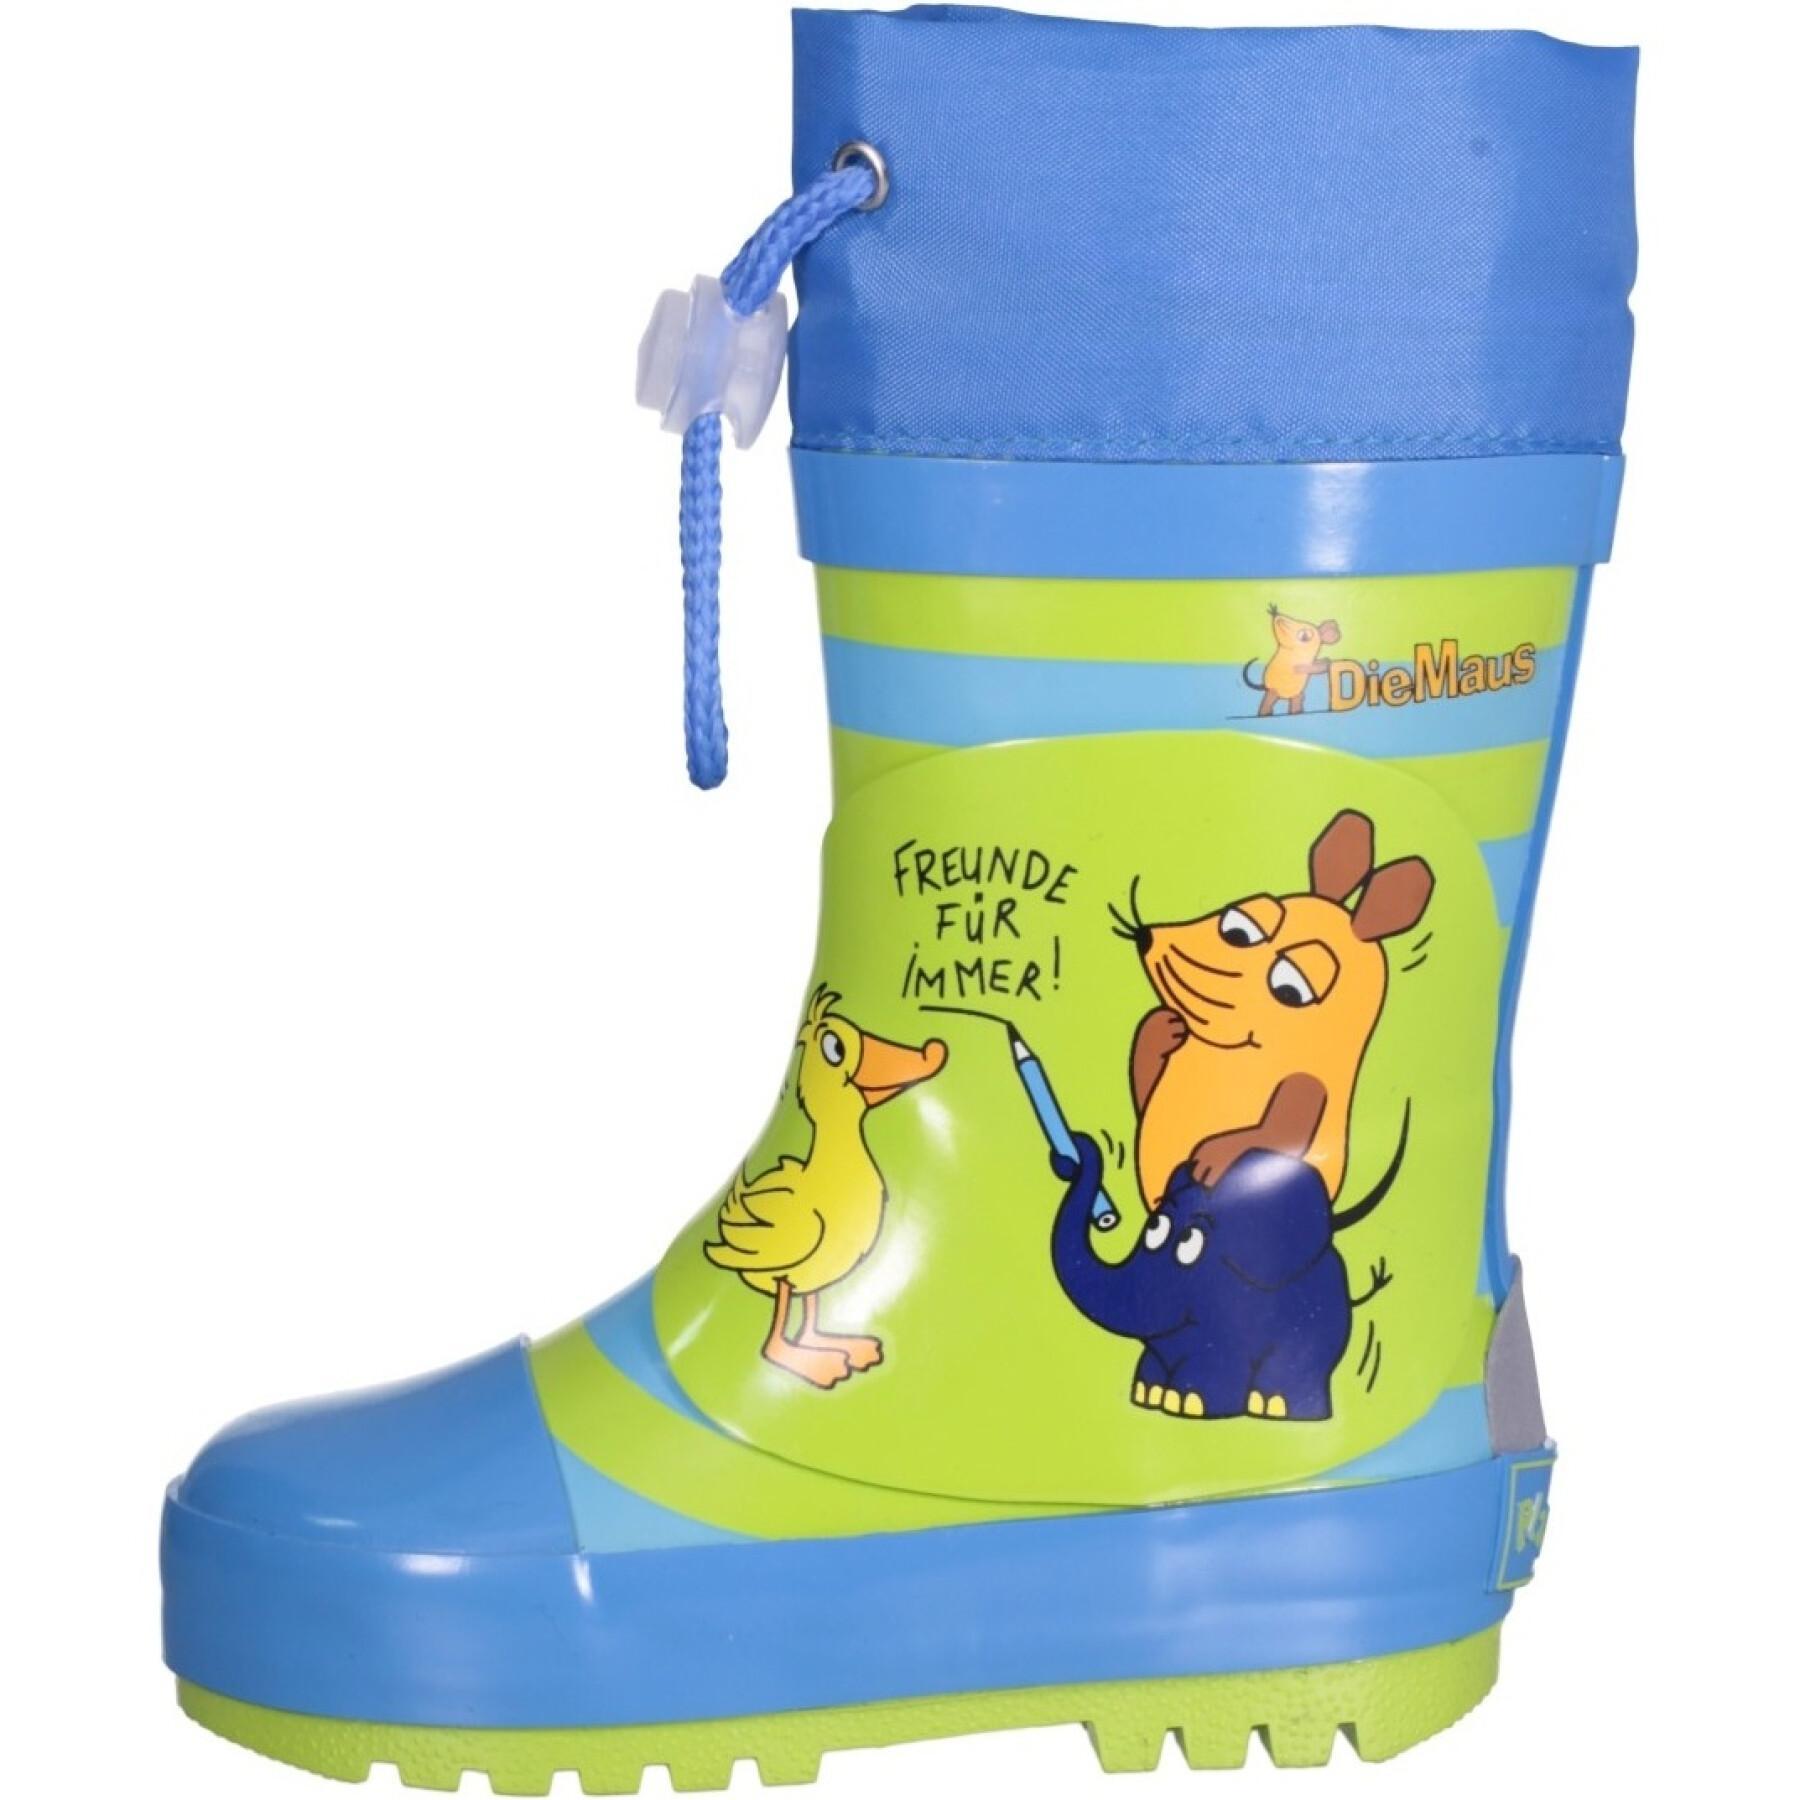 Baby-Gummistiefel Playshoes Friends 4 Ever